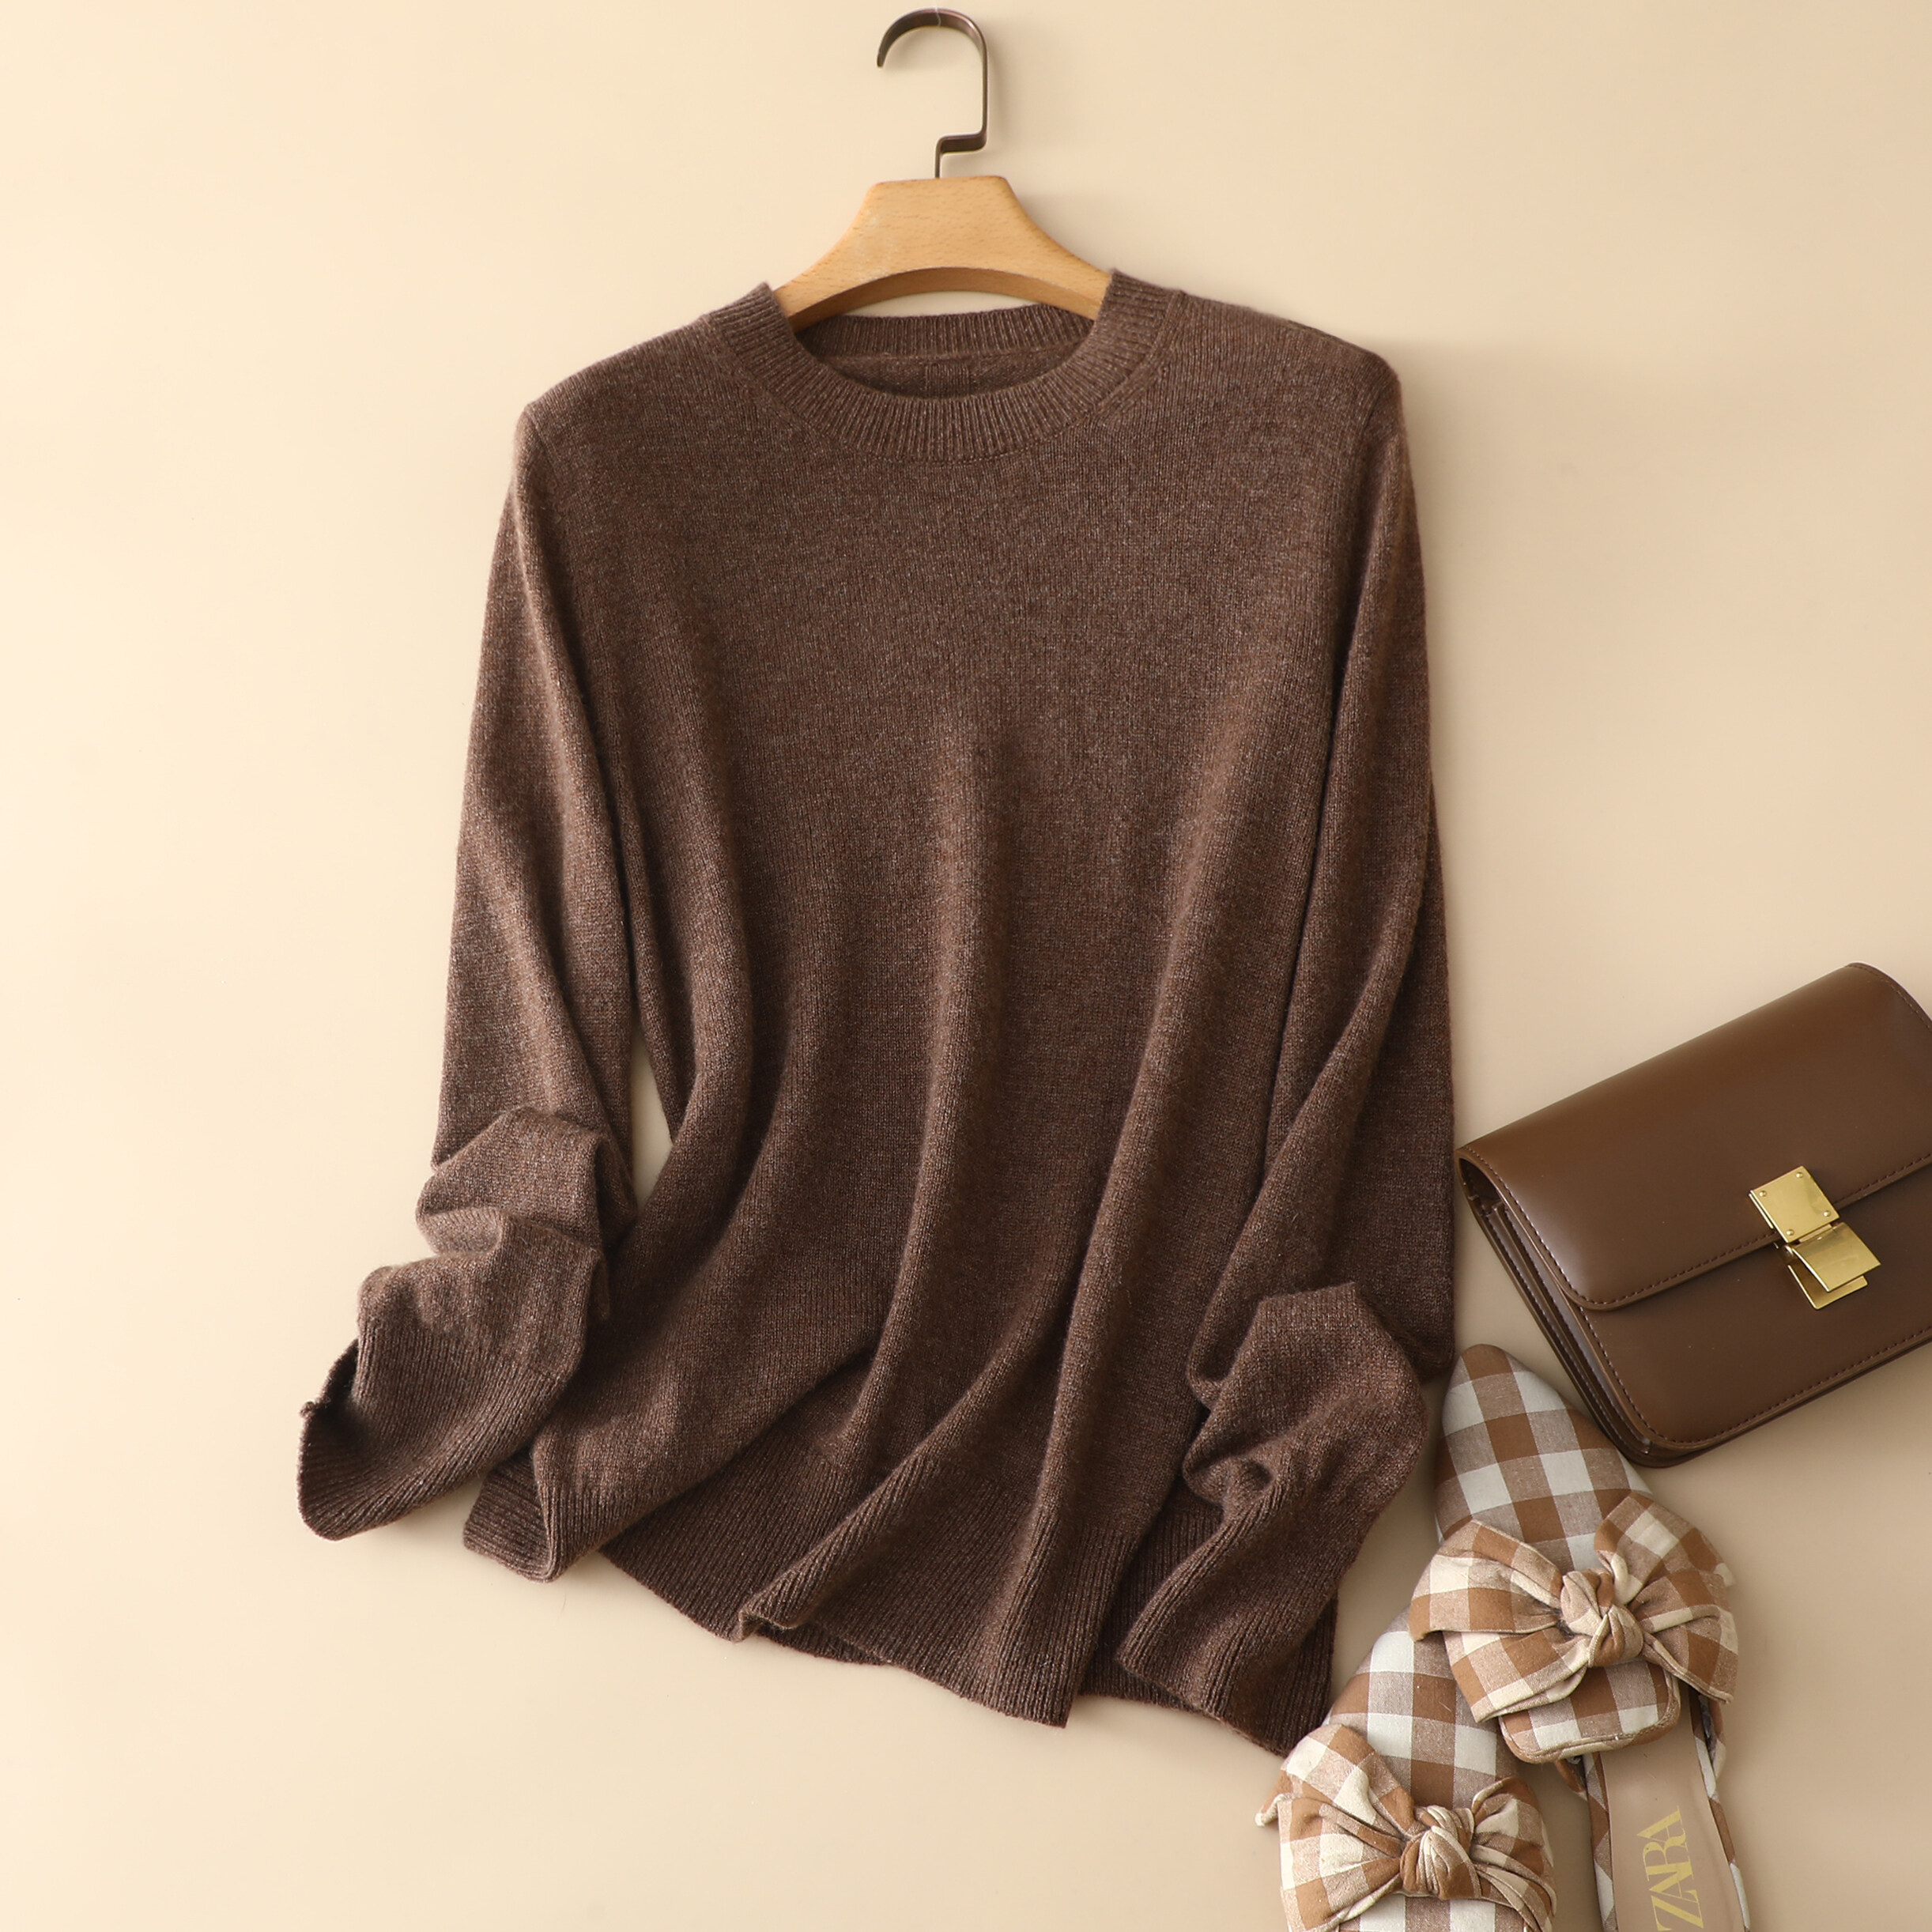 Nanteng New Stock 12GG Solid Basic Knit Long Sleeve Women Pullover 100% Cashmere Sweater